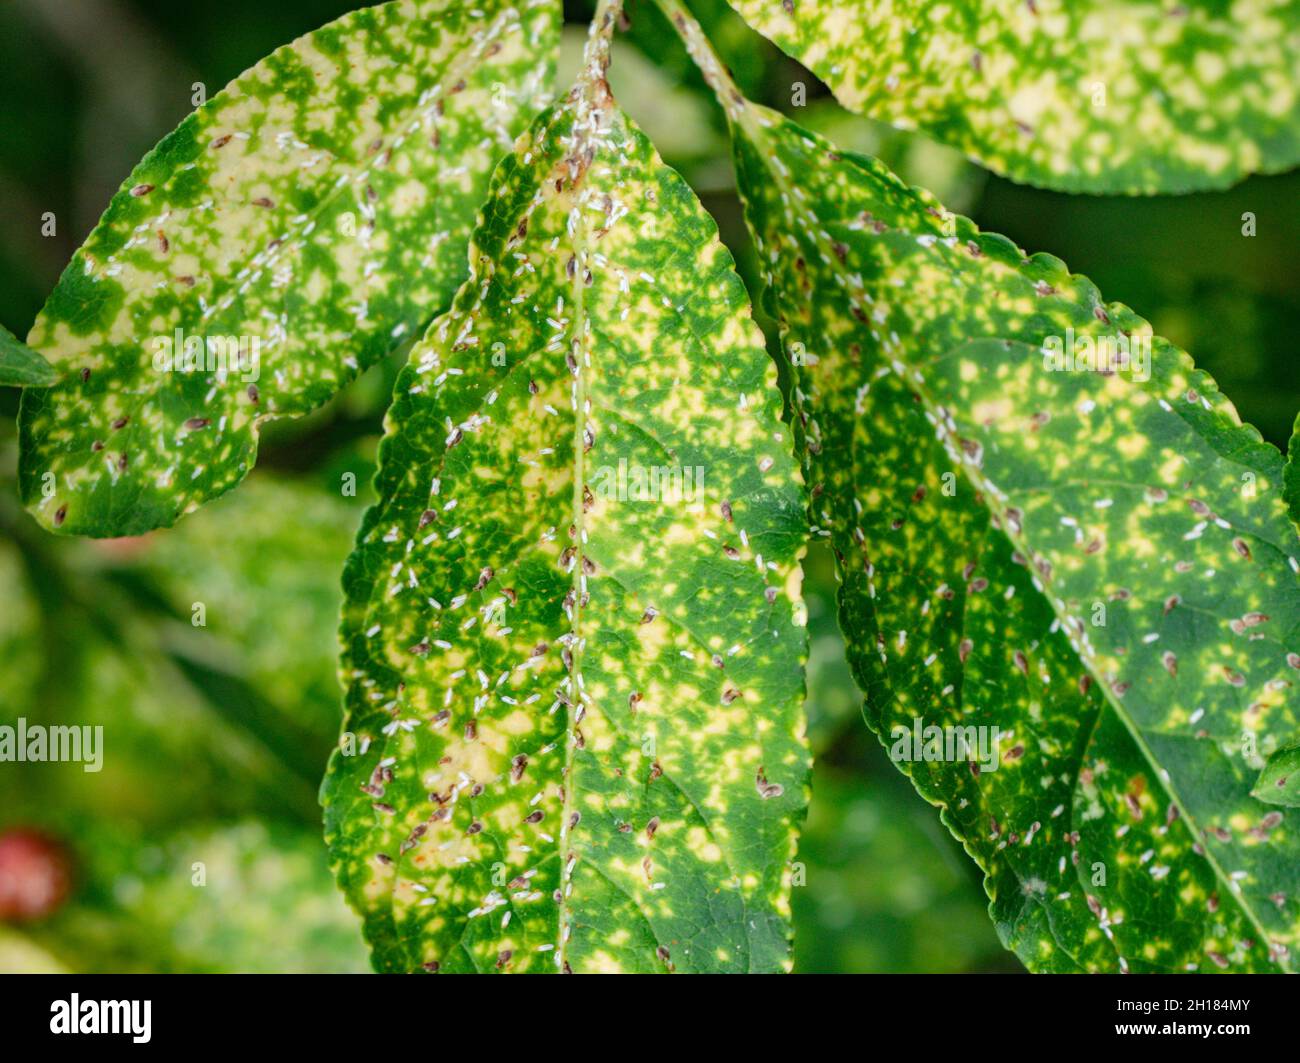 Defected leaves of euonymus on a branch against foliage. Problem with scale insects. Stock Photo